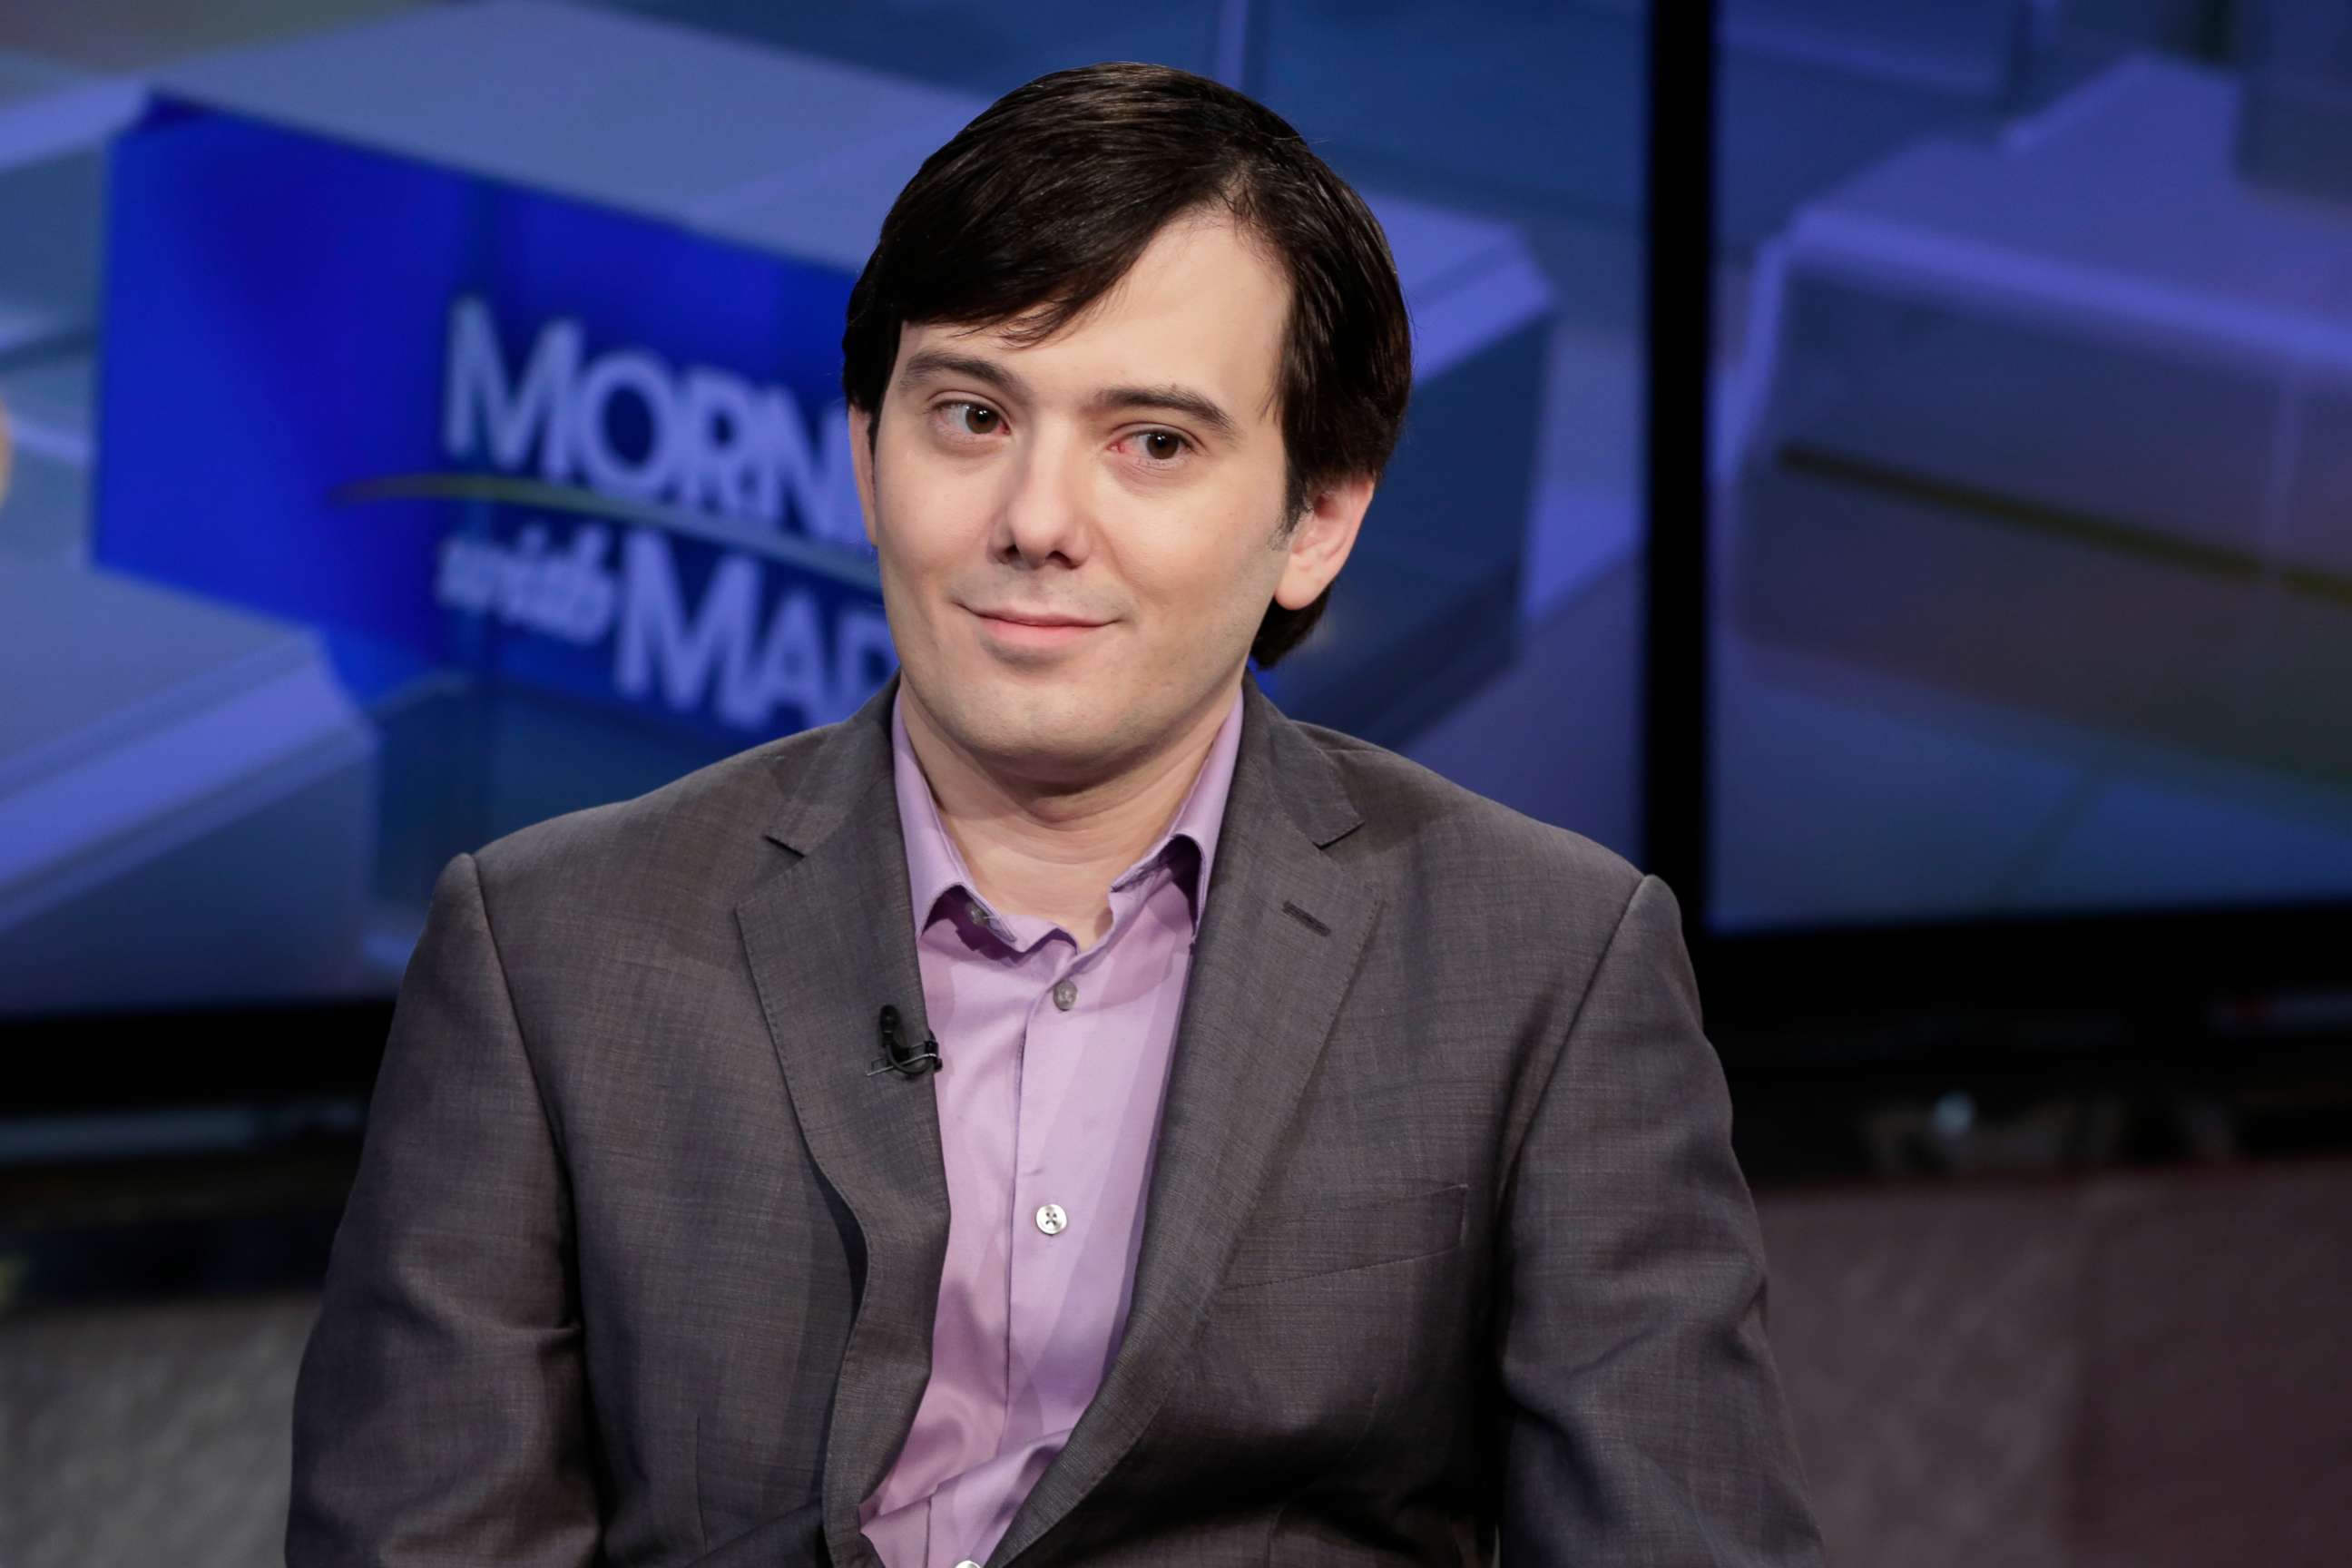 PHOTO: In this file photo, Martin Shkreli is interviewed on the Fox Business Network, in New York, Aug. 15, 2017.